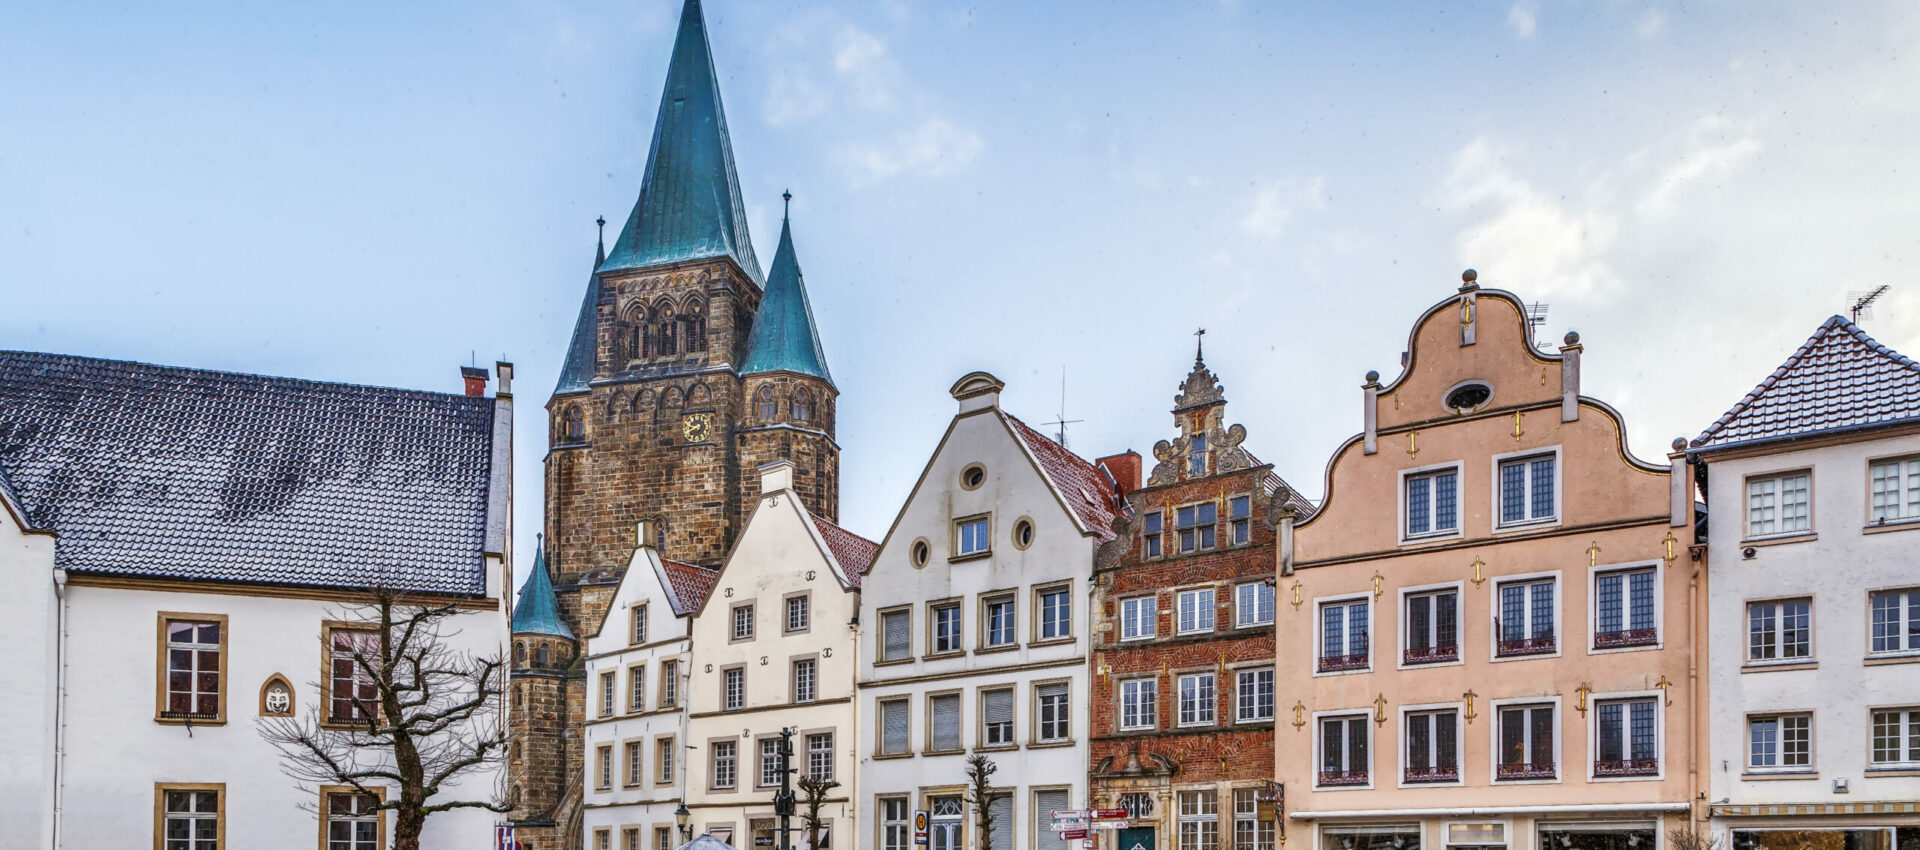 Historical market square with beautiful houses, Warendorf, Germany